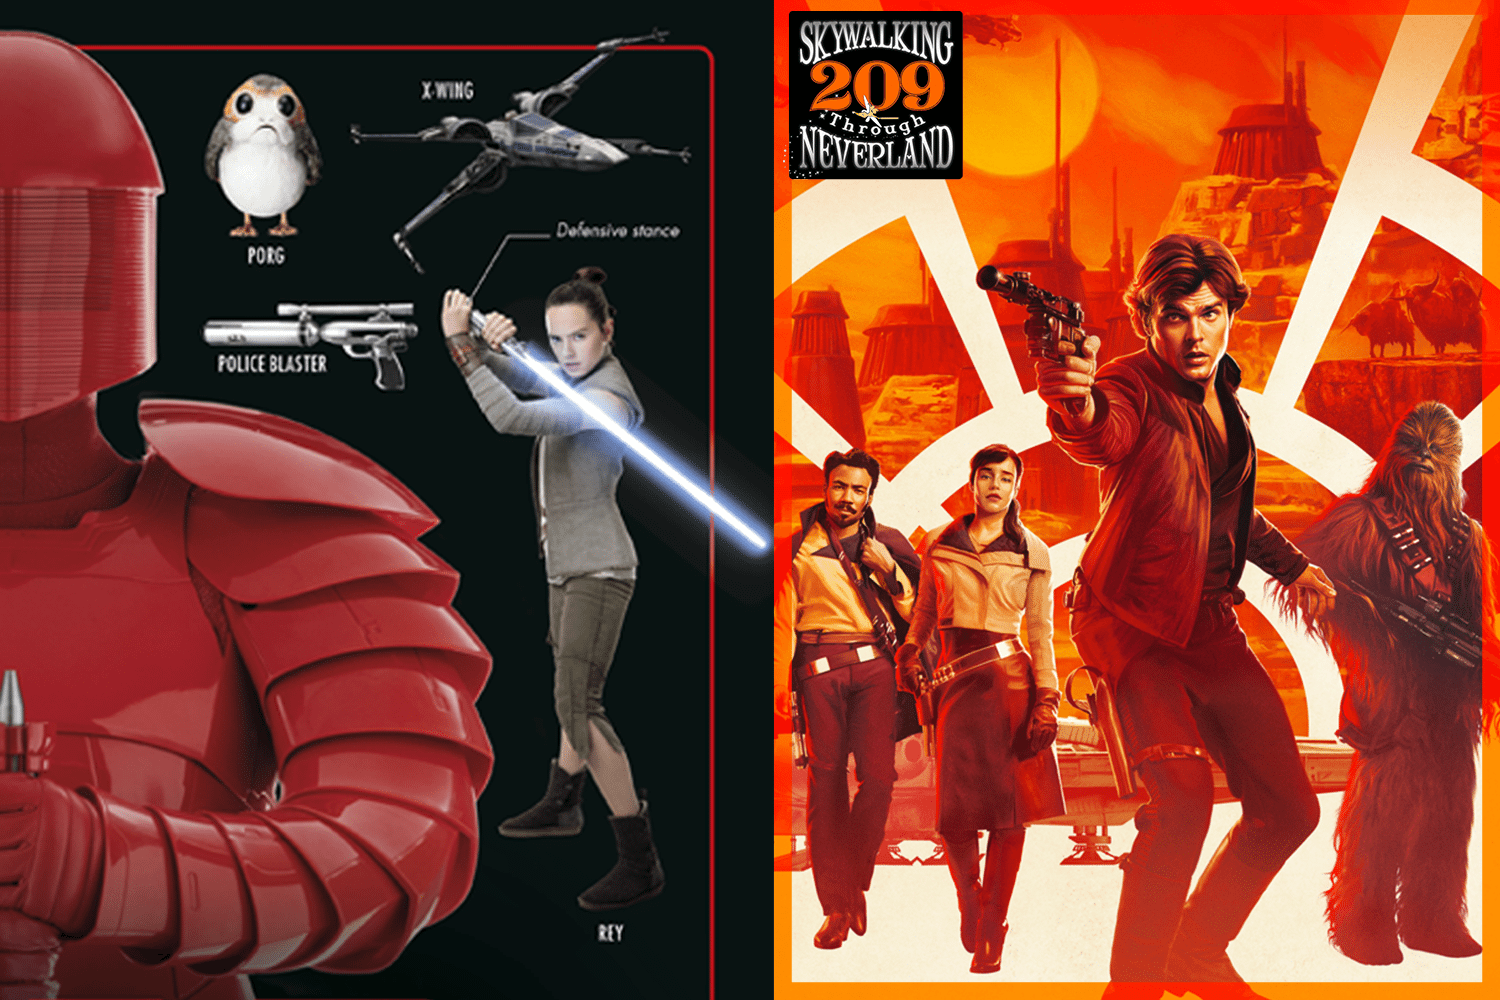 Skywalking Through Neverland #209: Solo and The Last Jedi Fun Facts